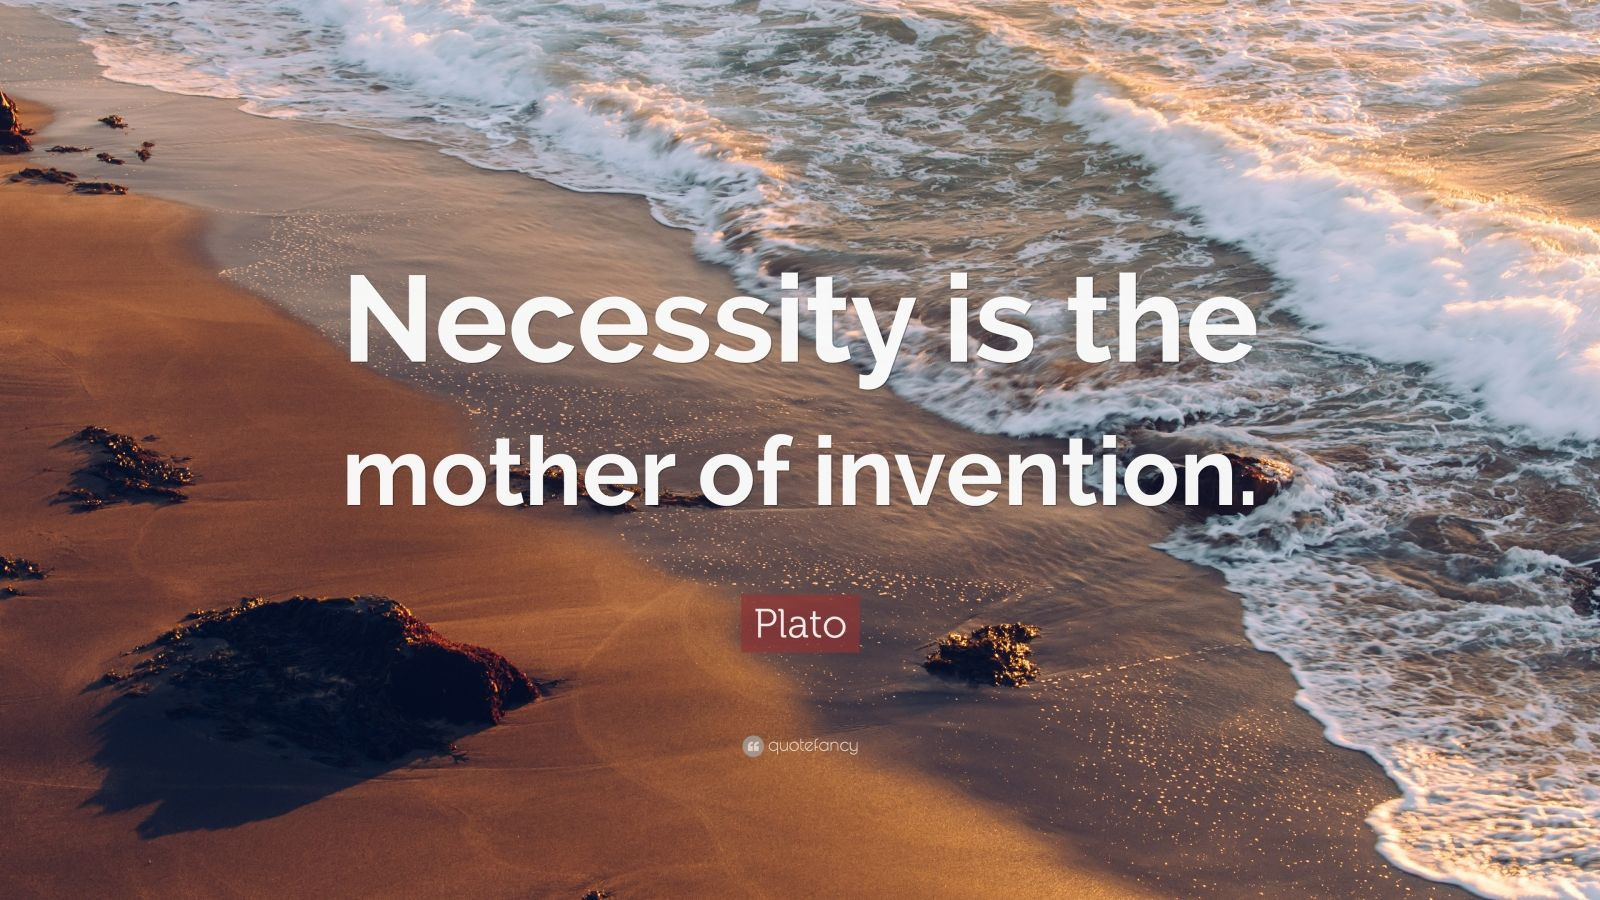 Necessity Is The Mother Of Invention Quote
 Plato Quote “Necessity is the mother of invention ” 12